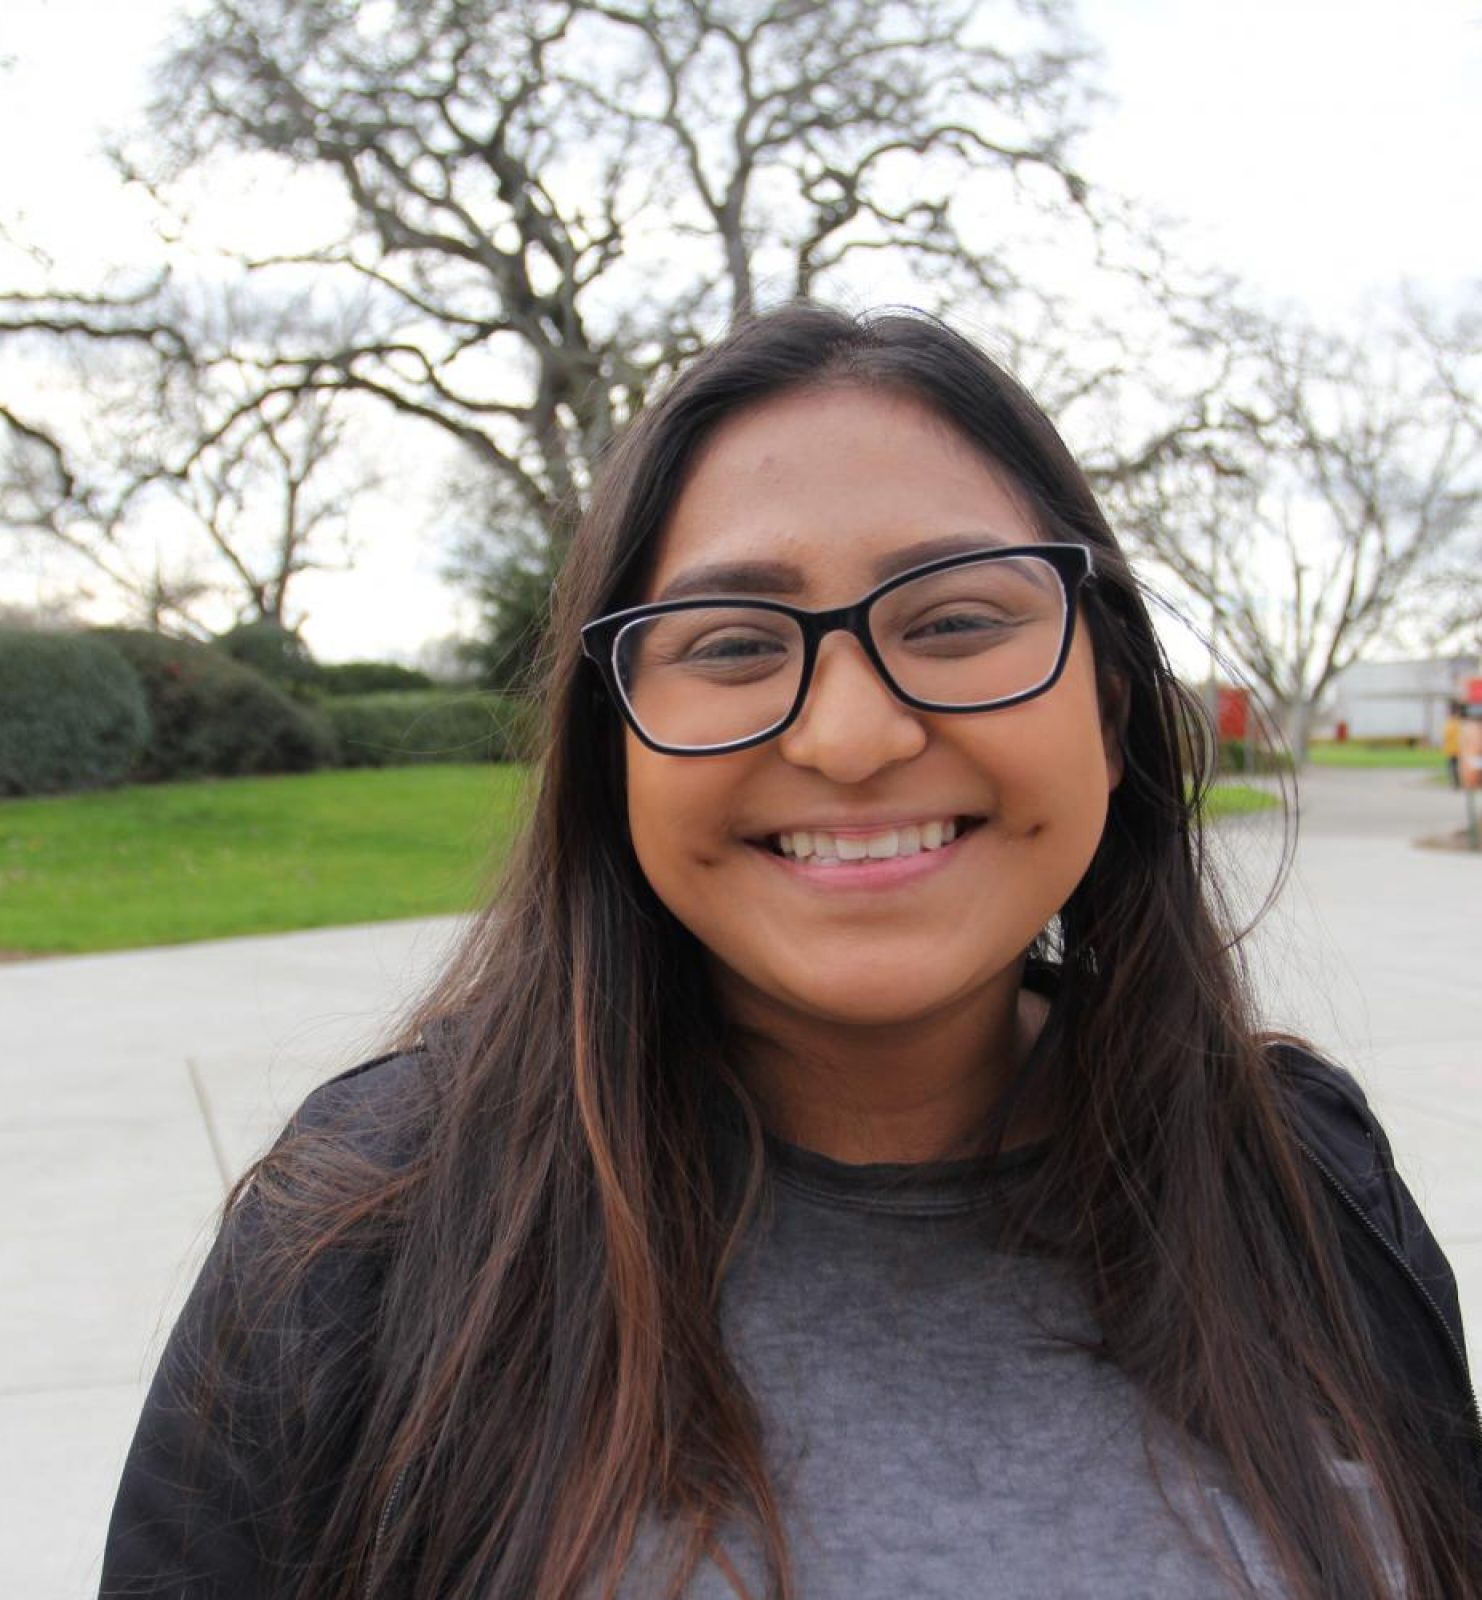 “My coffee motivates me in the morning. I go to the gym at 5 in the morning, do my breakfast, and go to school.” – Lupita Rodriguez | Zoology Major